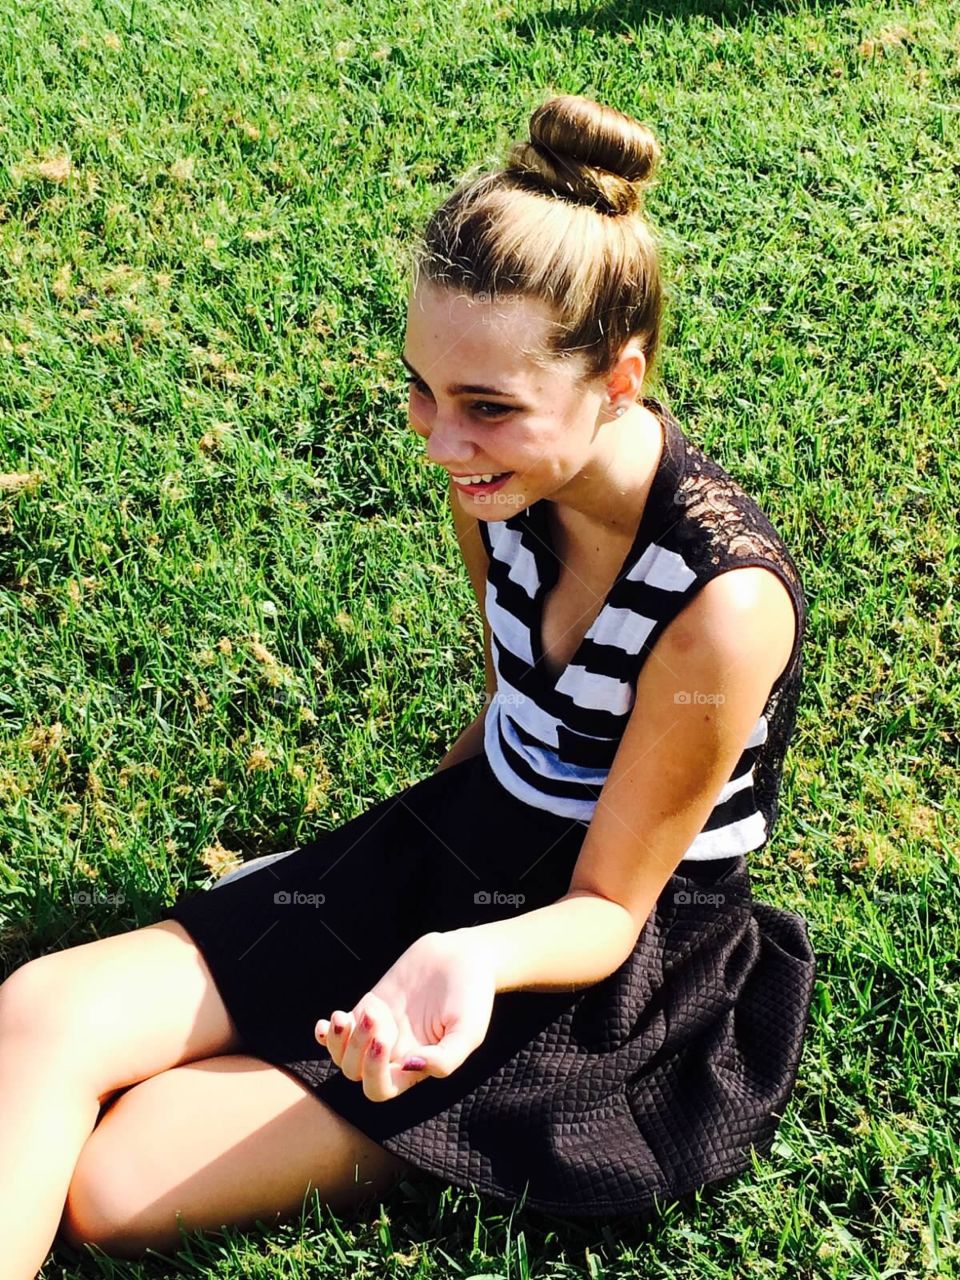 Laughing girl in grass 